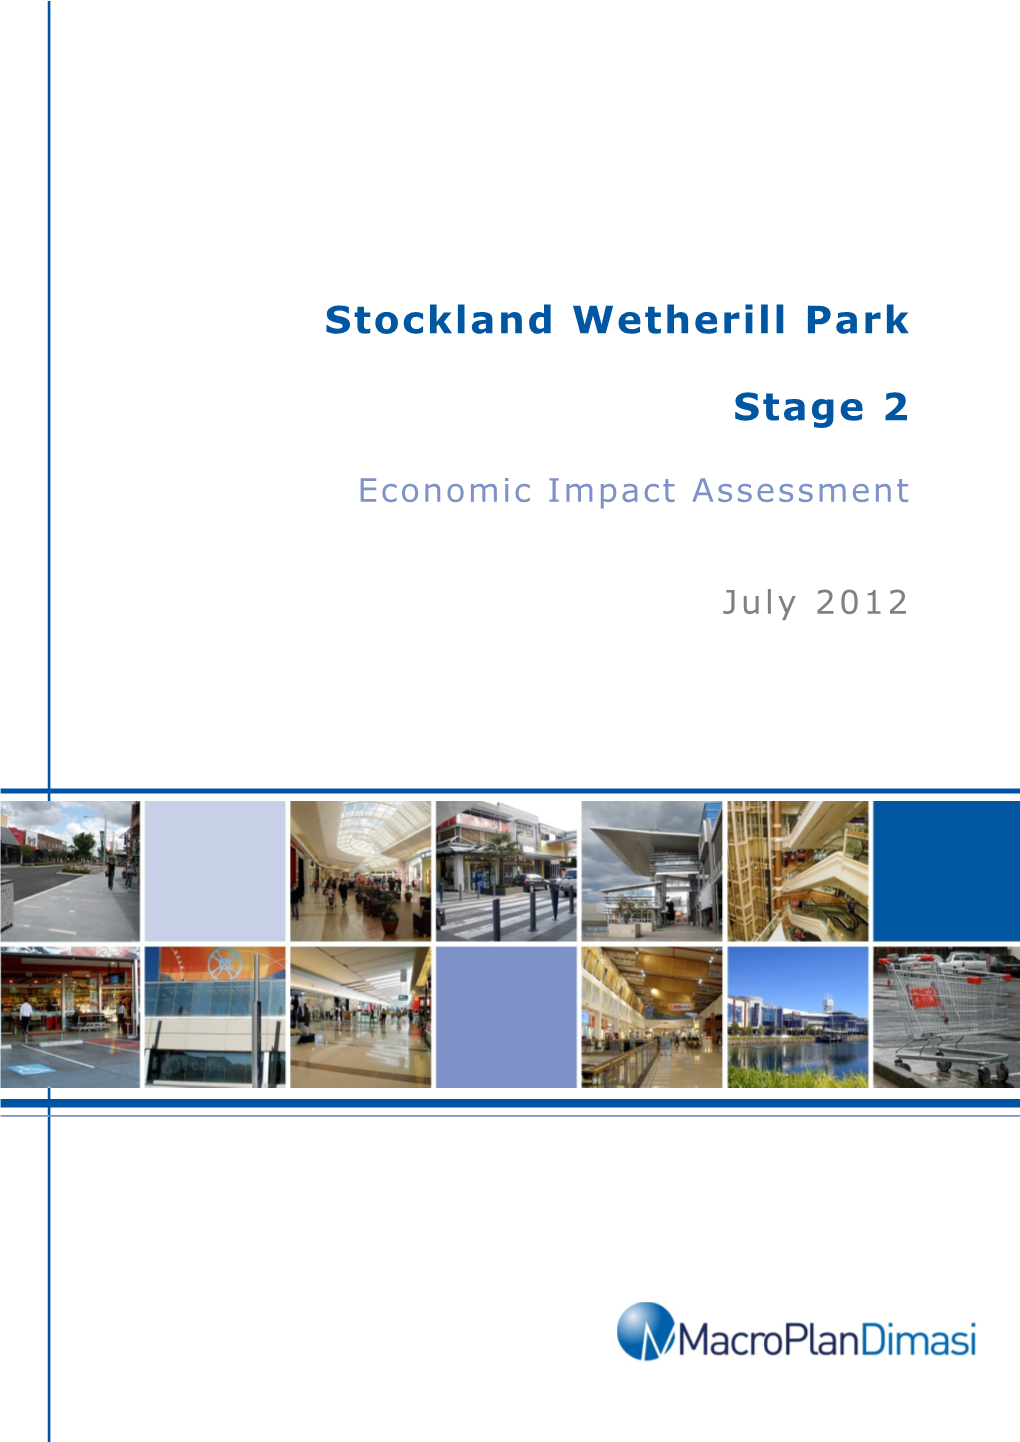 Stockland Wetherill Park Stage 2